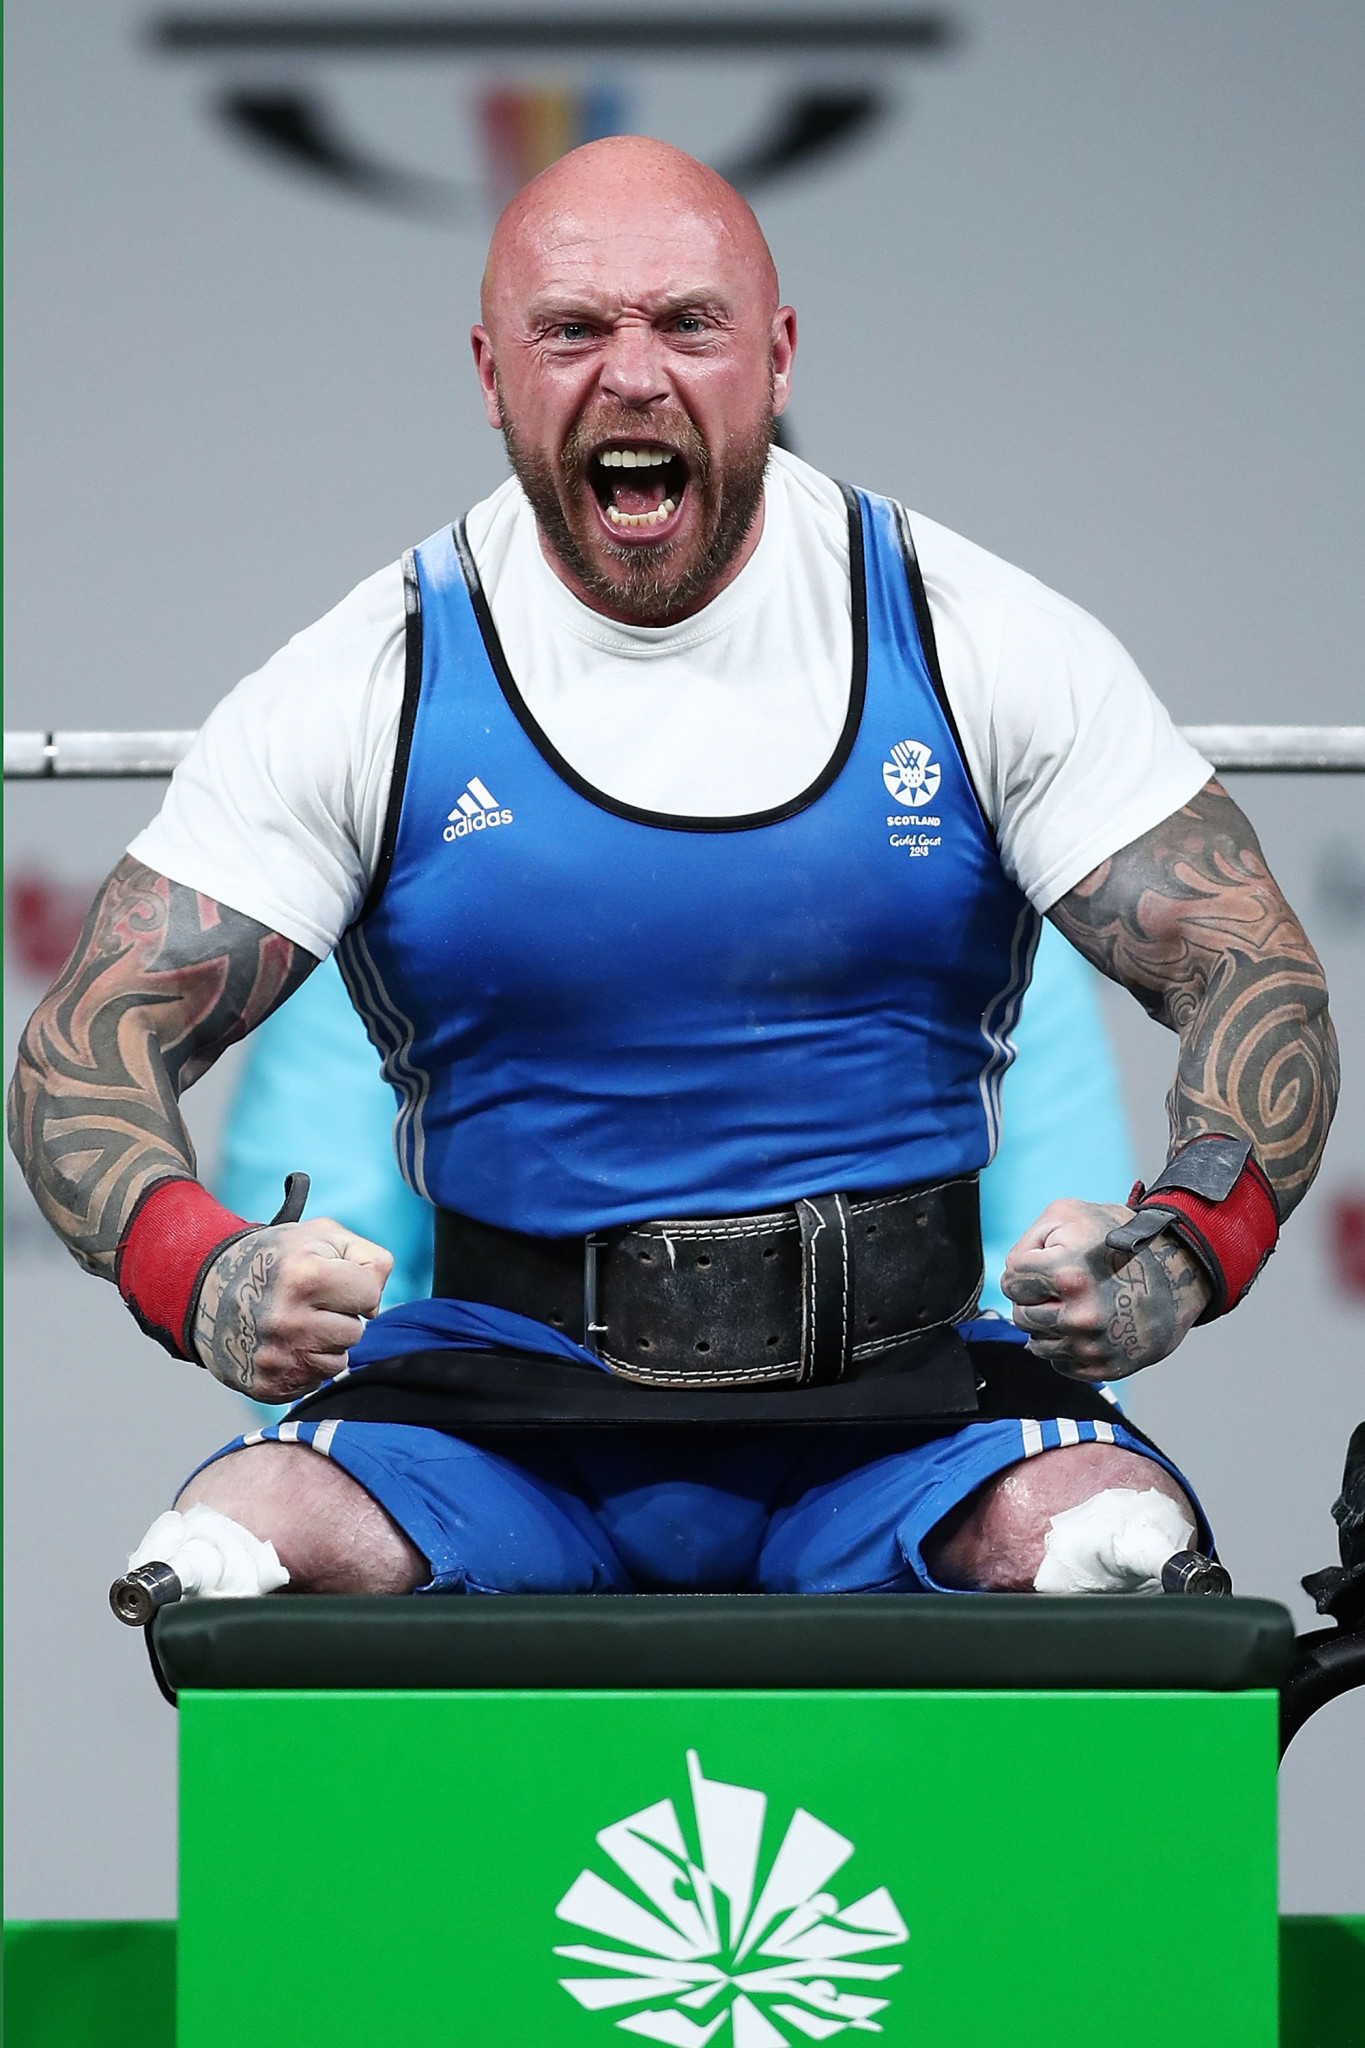 Great Britain's Michael Yule will now receive Issa's silver medal from the 2017 World Para Powerlifting World Cup ©Getty Images 